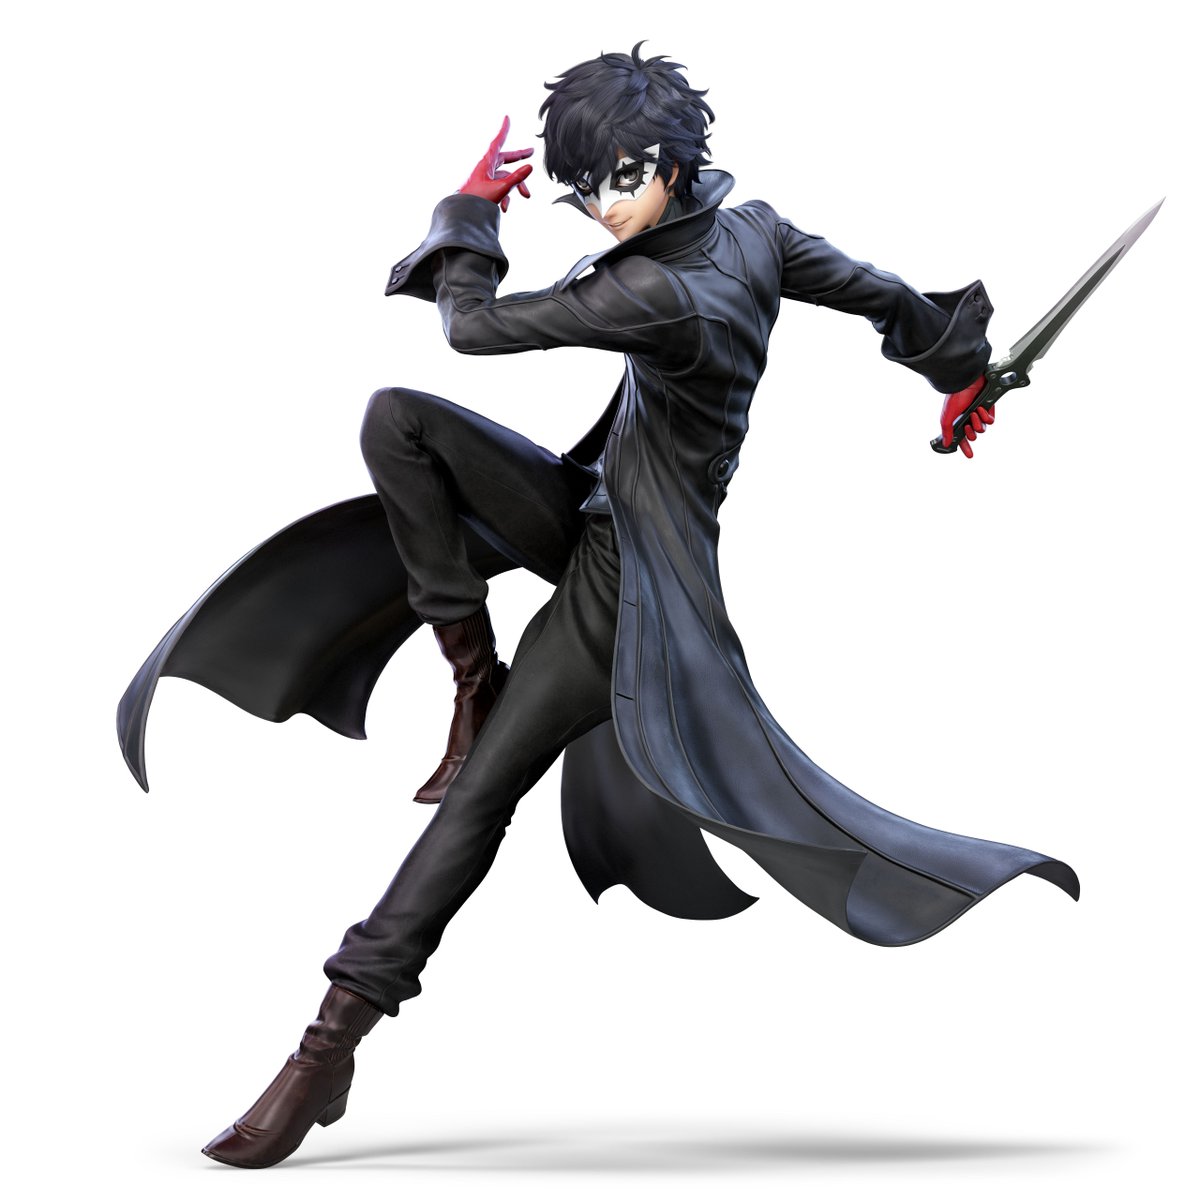 Super Smash Bros. Ultimate Joker. Select this character for for counters, counter tips, and more!